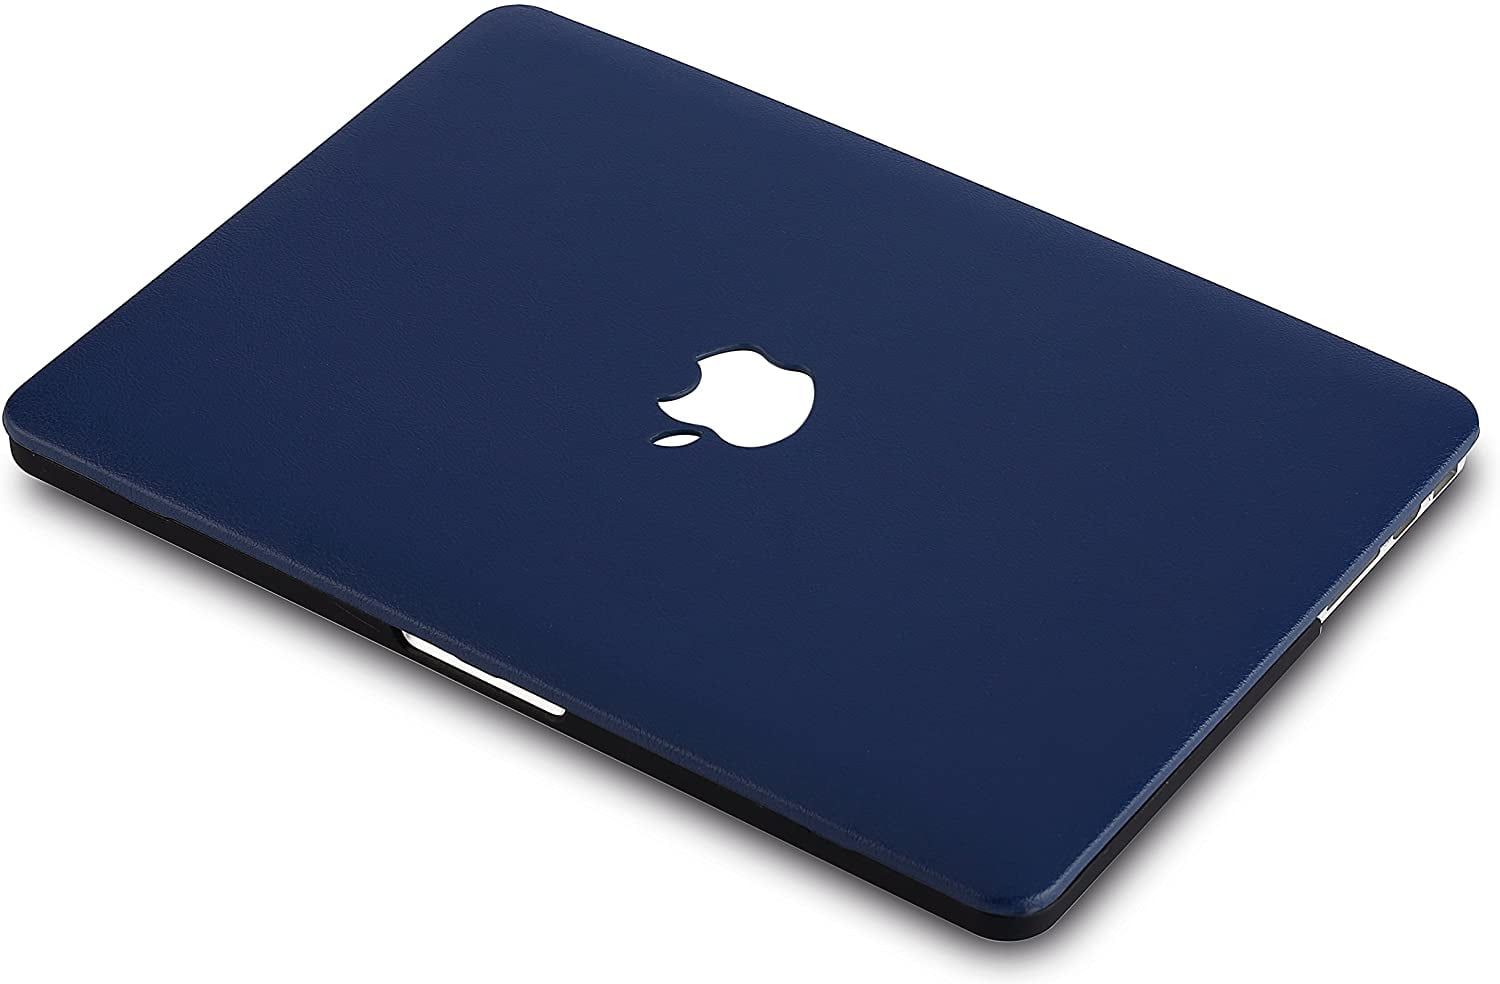 -2015 Blue Plastic Case Hard Shell Cover A1502 / A1425 KECC Laptop Case for Old MacBook Pro 13” Retina 